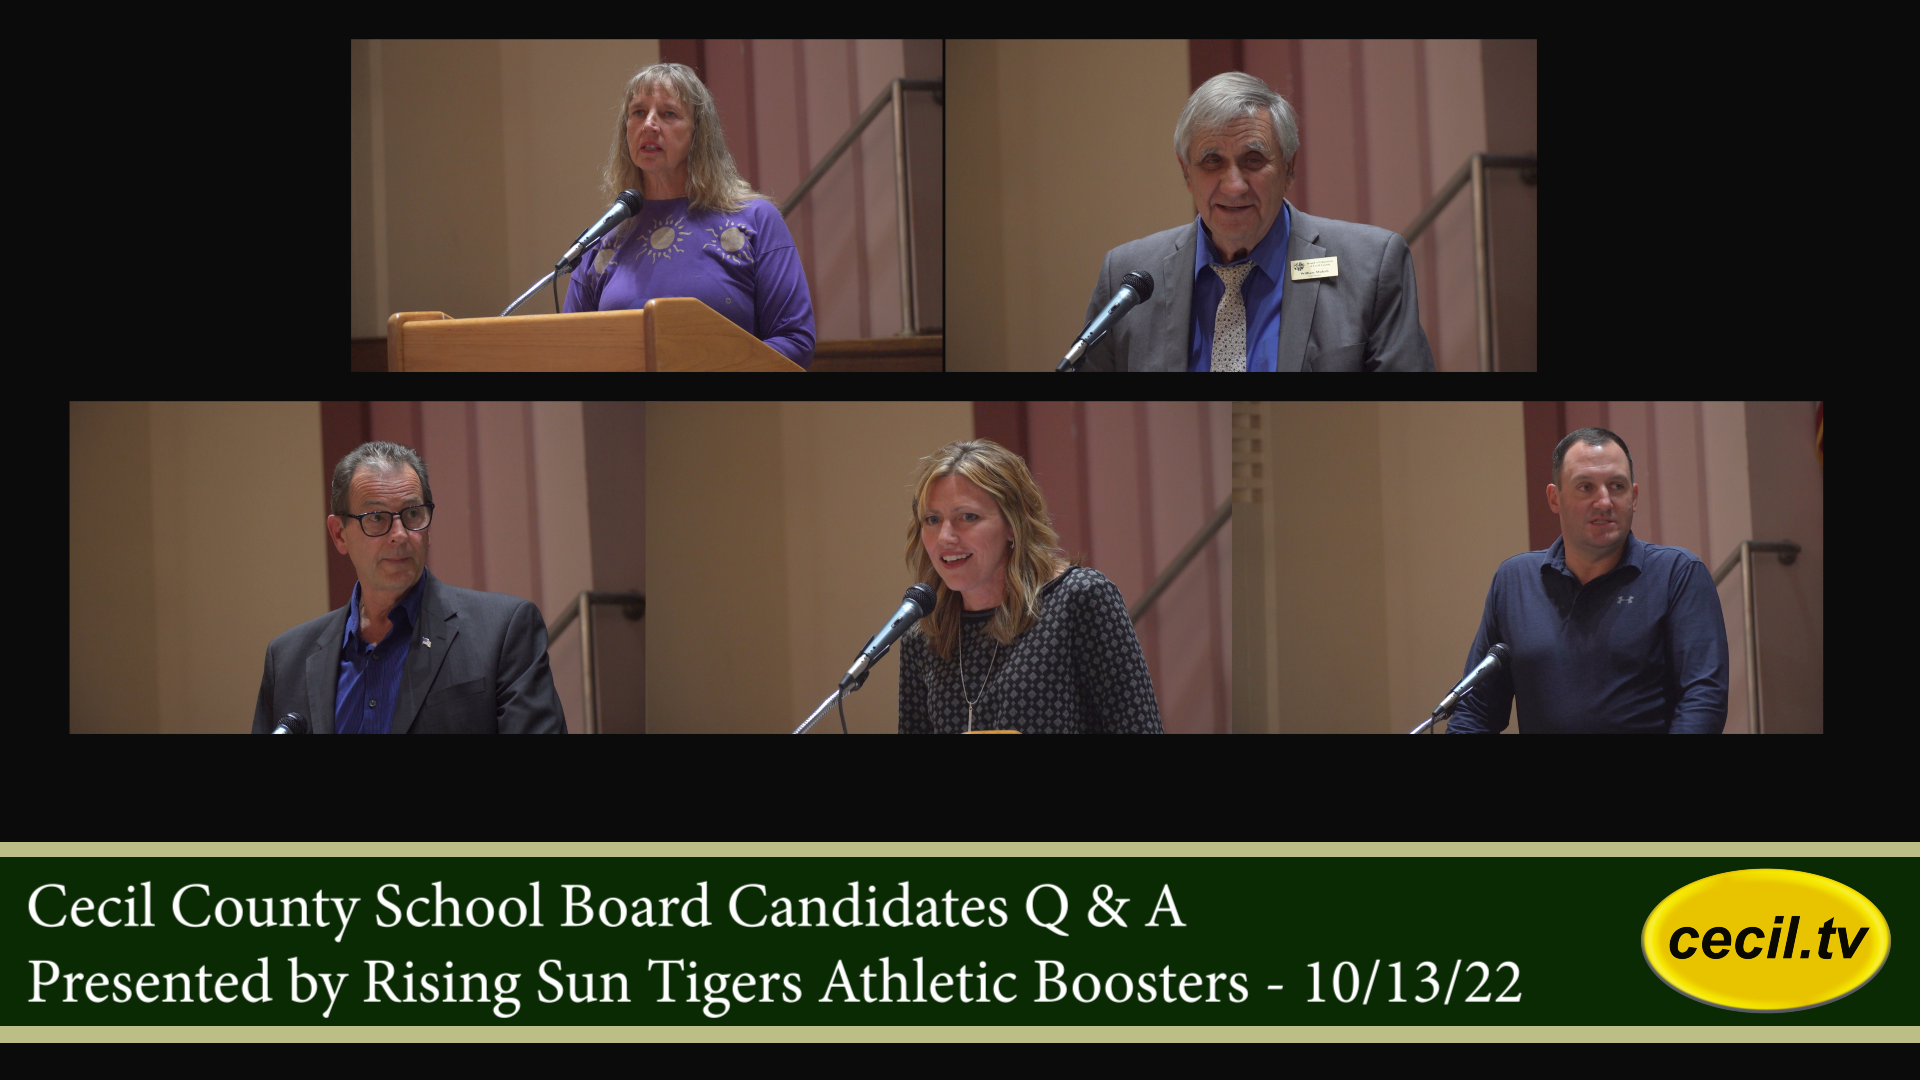 Cecil School Board Candidates Q & A Presented by Rising Sun Tigers Athletic Boosters - 10/13/22